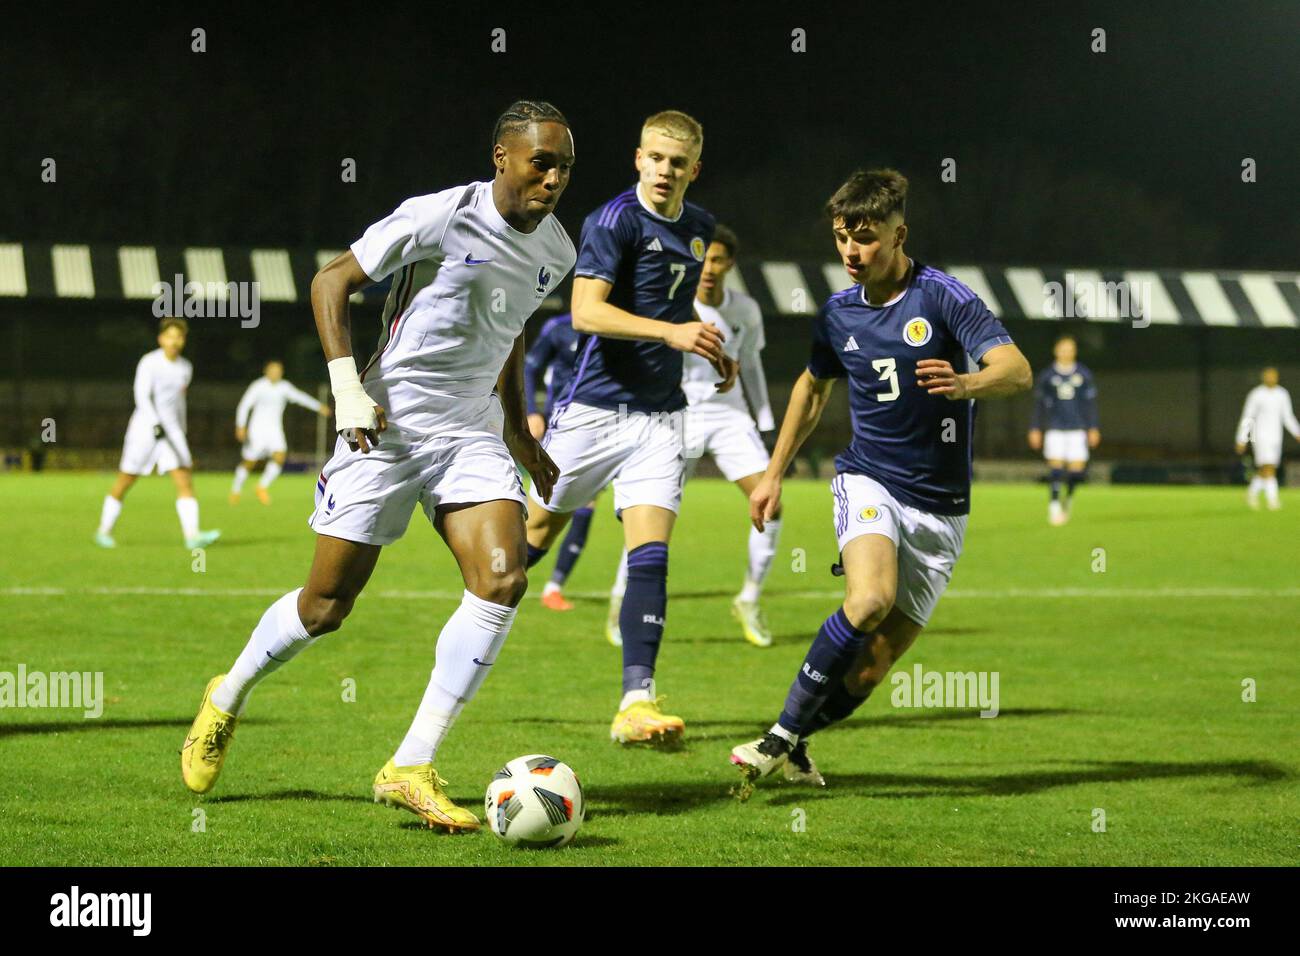 Ayr, UK. 22nd Nov, 2022. Scotland under 19s played against France under 19s at Sommerset Park, Ayr, Ayrshire Scotland, UK in the European Under 19 Championship 2023 qualifying round. France won 3 -1 and this puts Scotland out the competition and France go through to the next round. Credit: Findlay/Alamy Live News Stock Photo